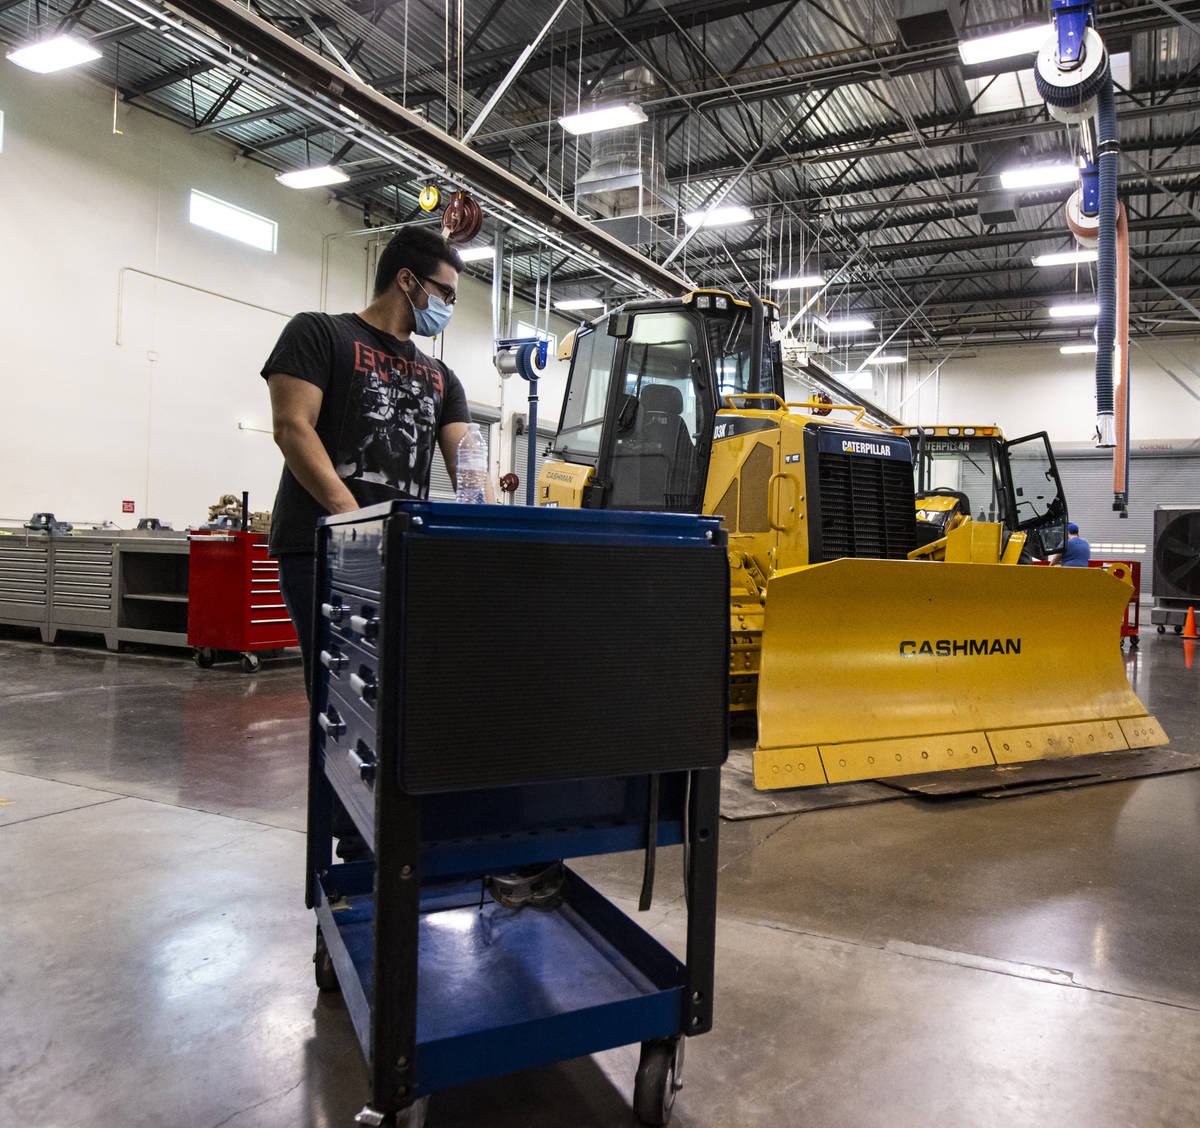 Student Samuel Branch, of Henderson, moves a tool cart during a diesel hydraulics class at the ...